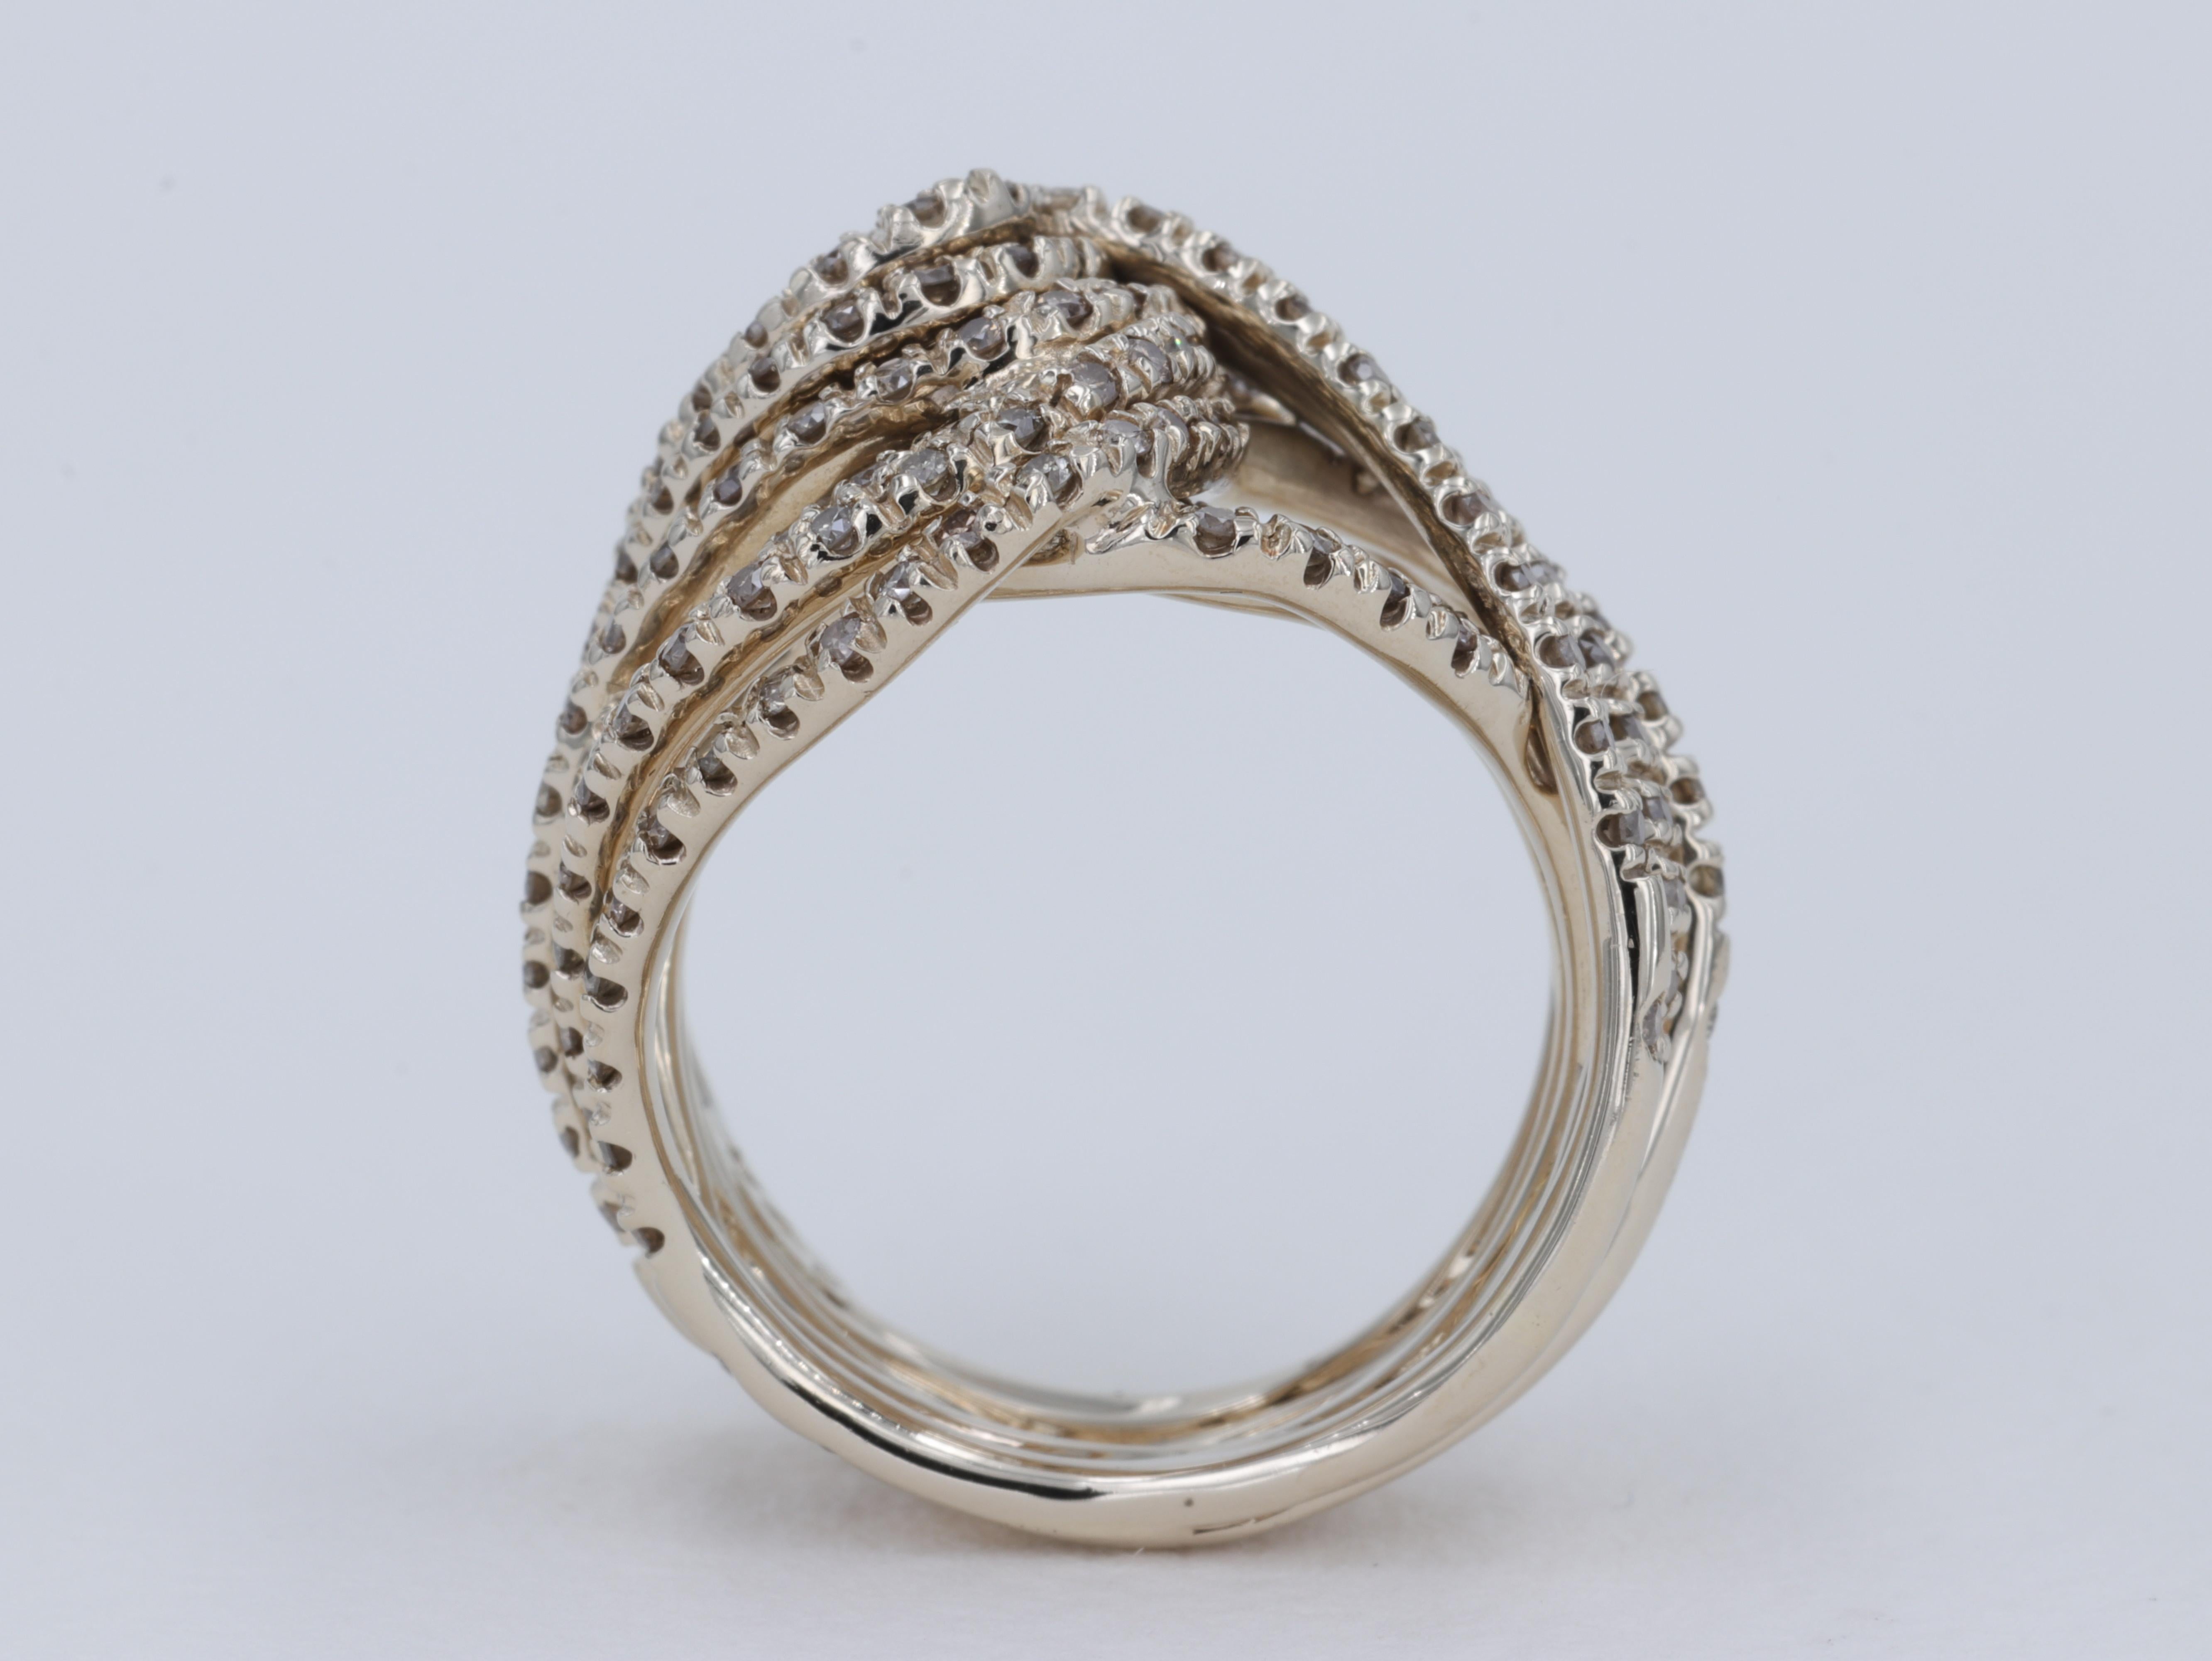 Round Cut H. Stern Zephyr Diamond and Noble Gold Multi Row Twist Ring Band